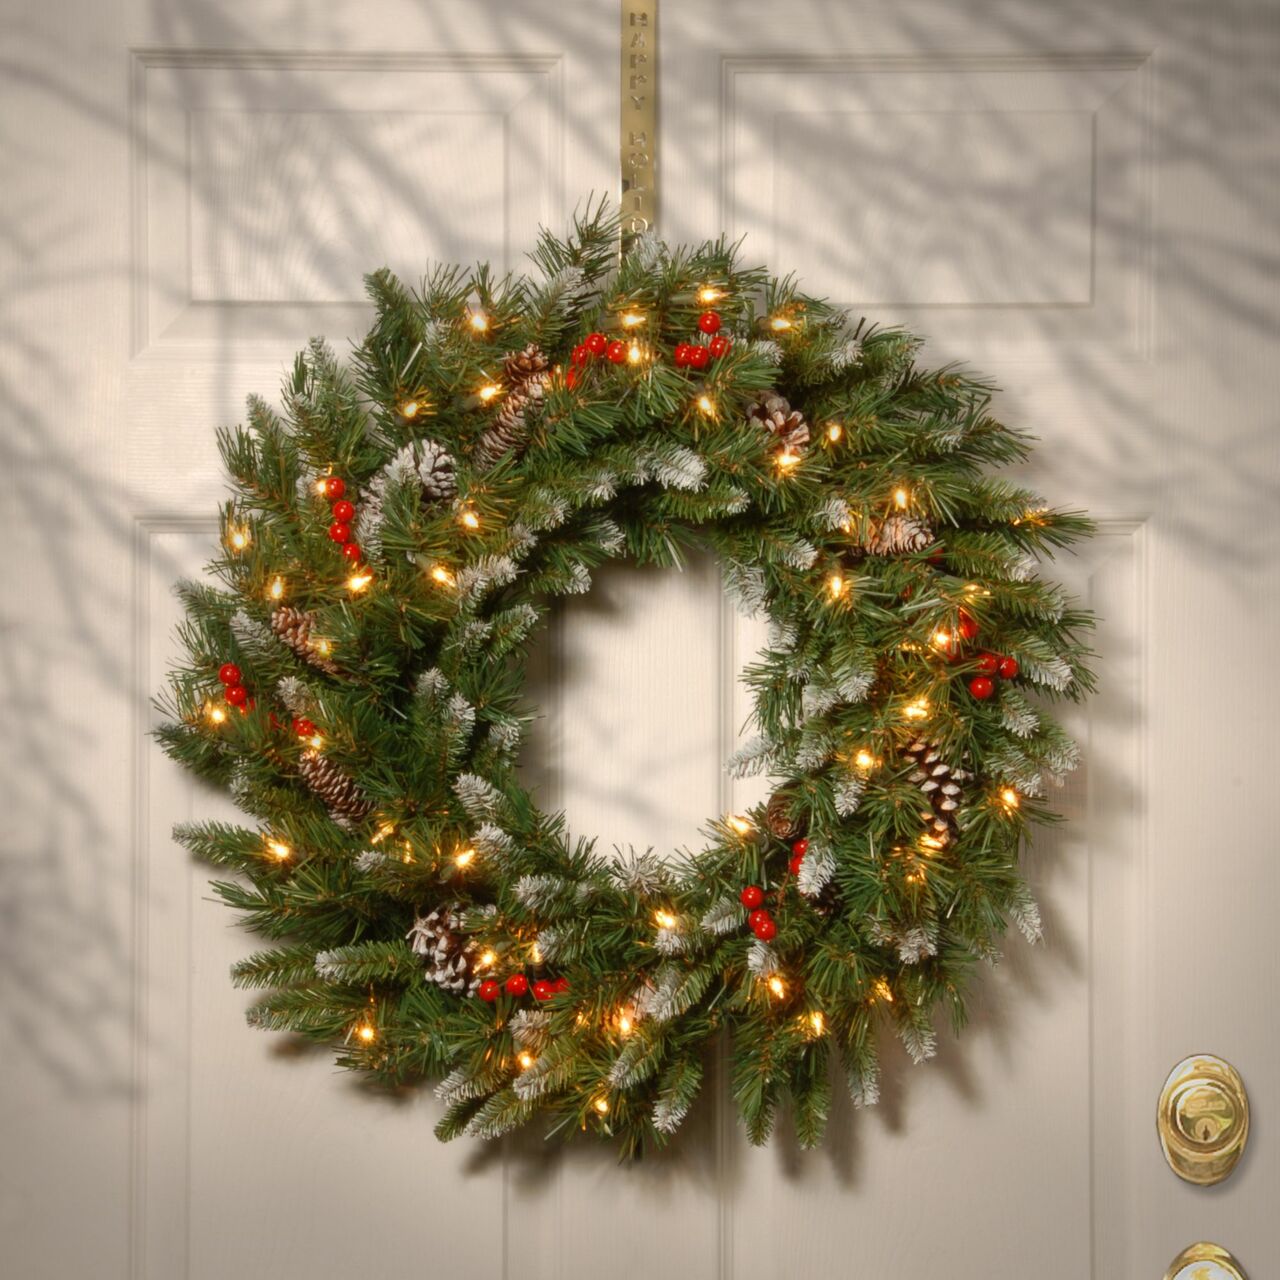 5 Decorations for a Perfect Outdoor Display - Christmas.com